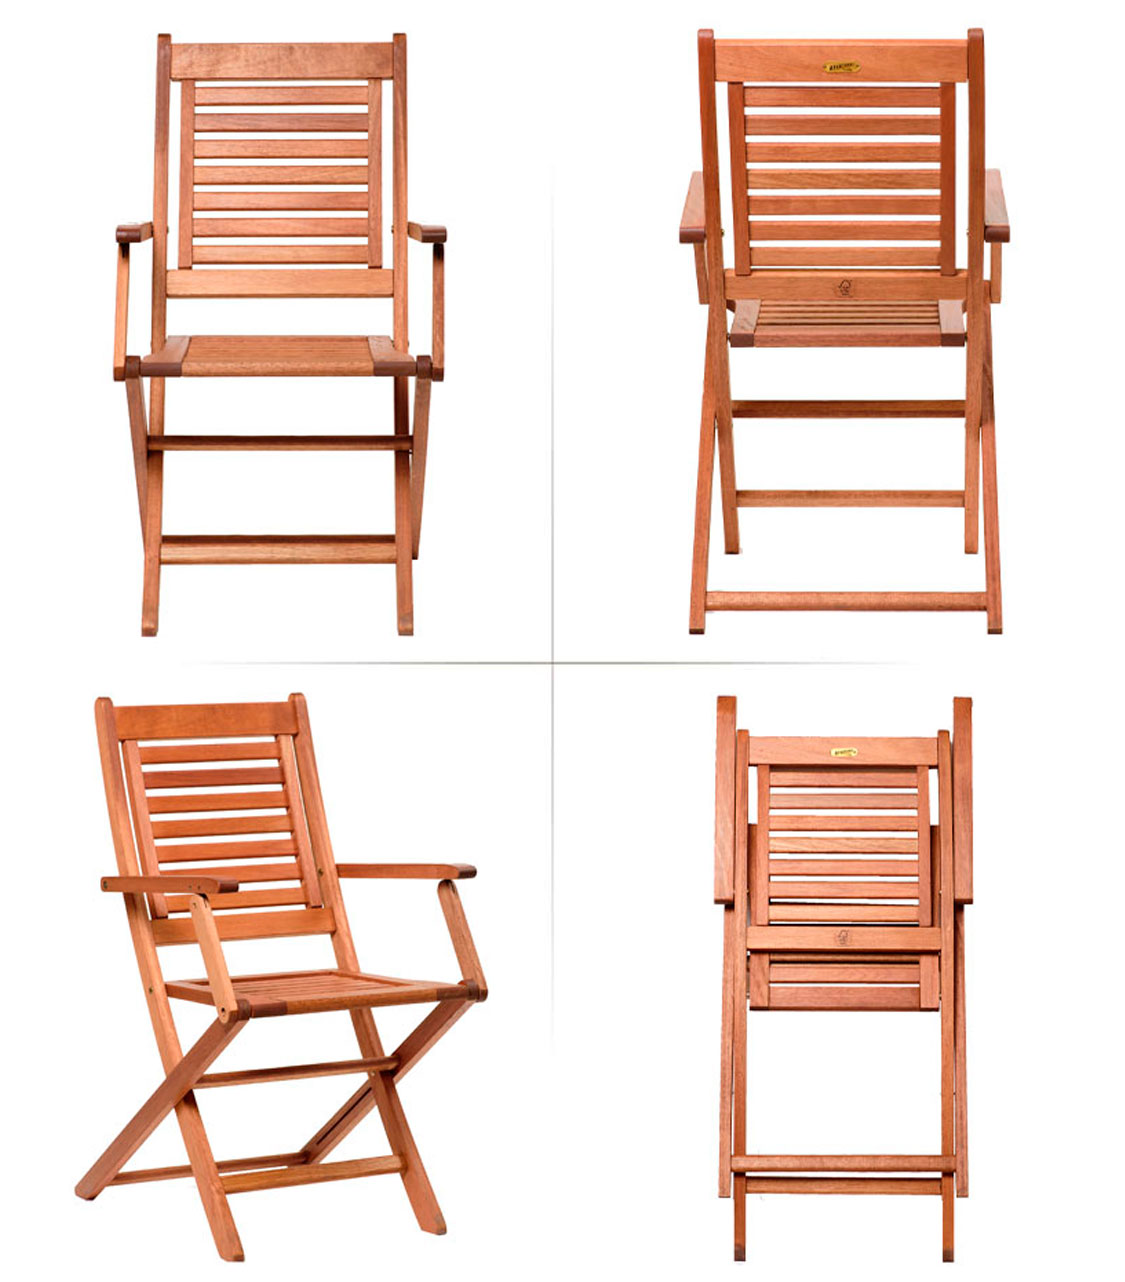 Amazonia Milano 2 Pieces Folding Armchairs | Eucalyptus Wood | Ideal for Outdoors and Indoors, Brown - image 2 of 5